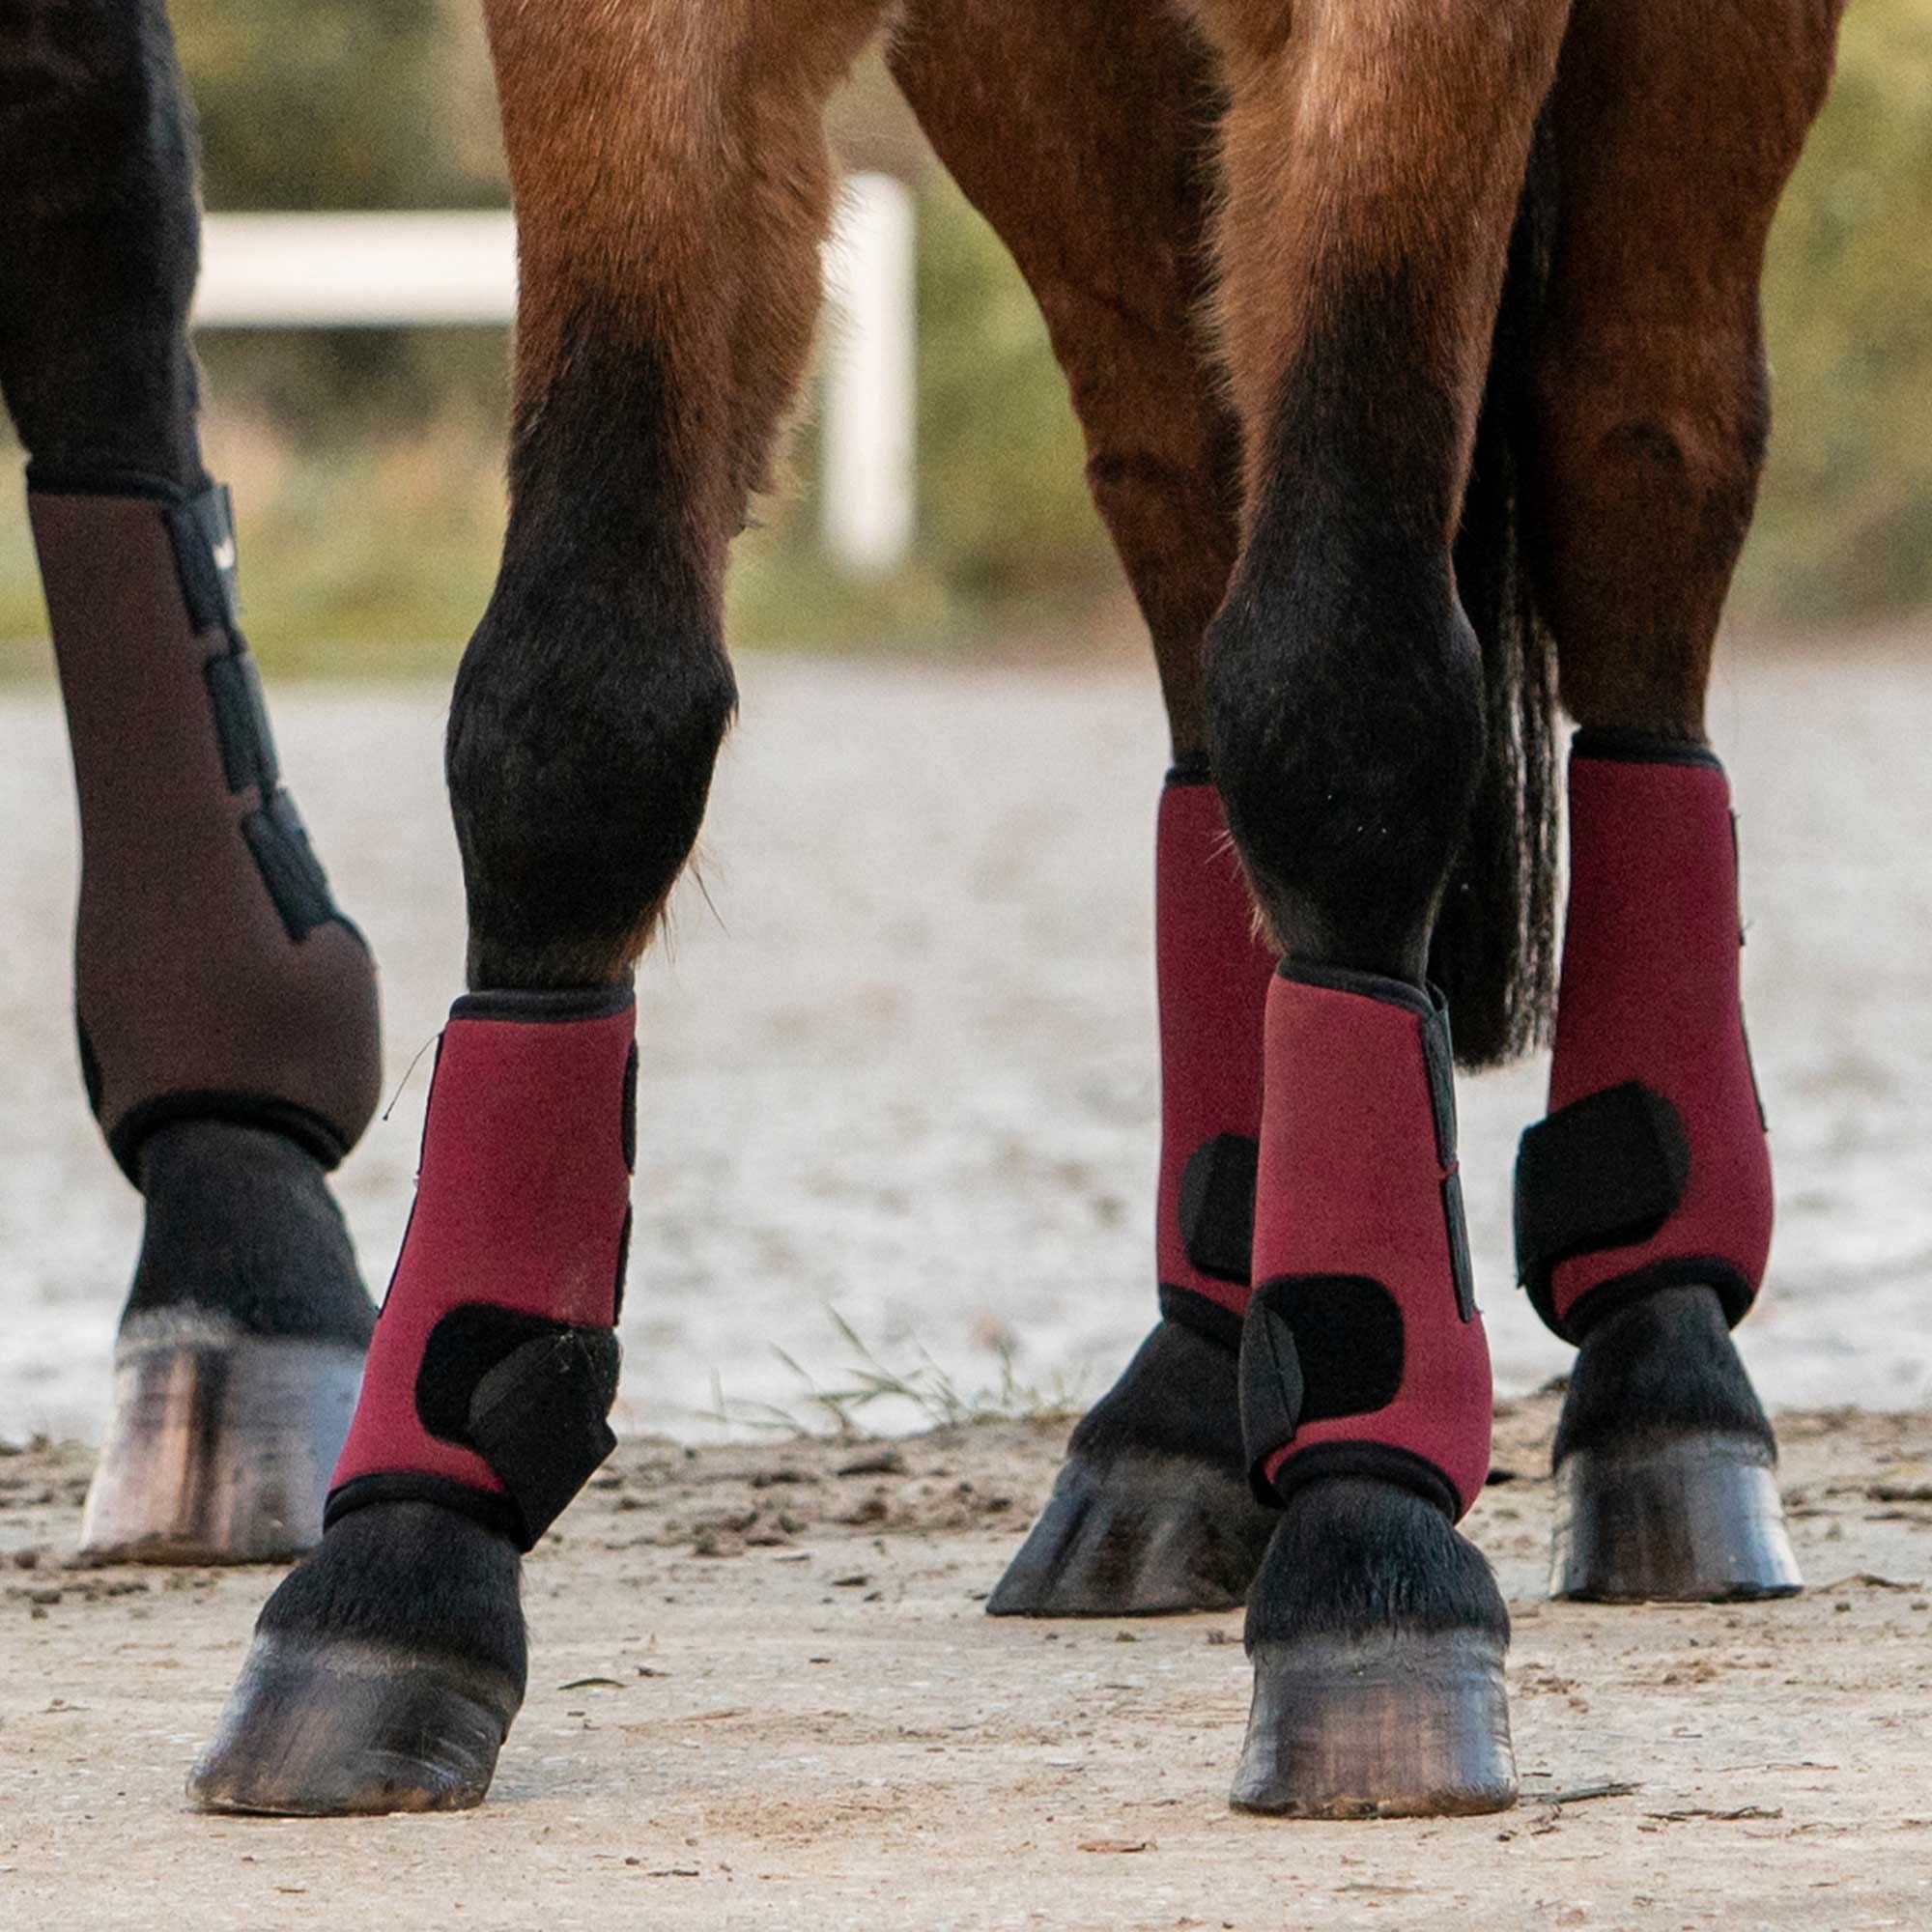 "Opal" Exercise Boots, Front Legs